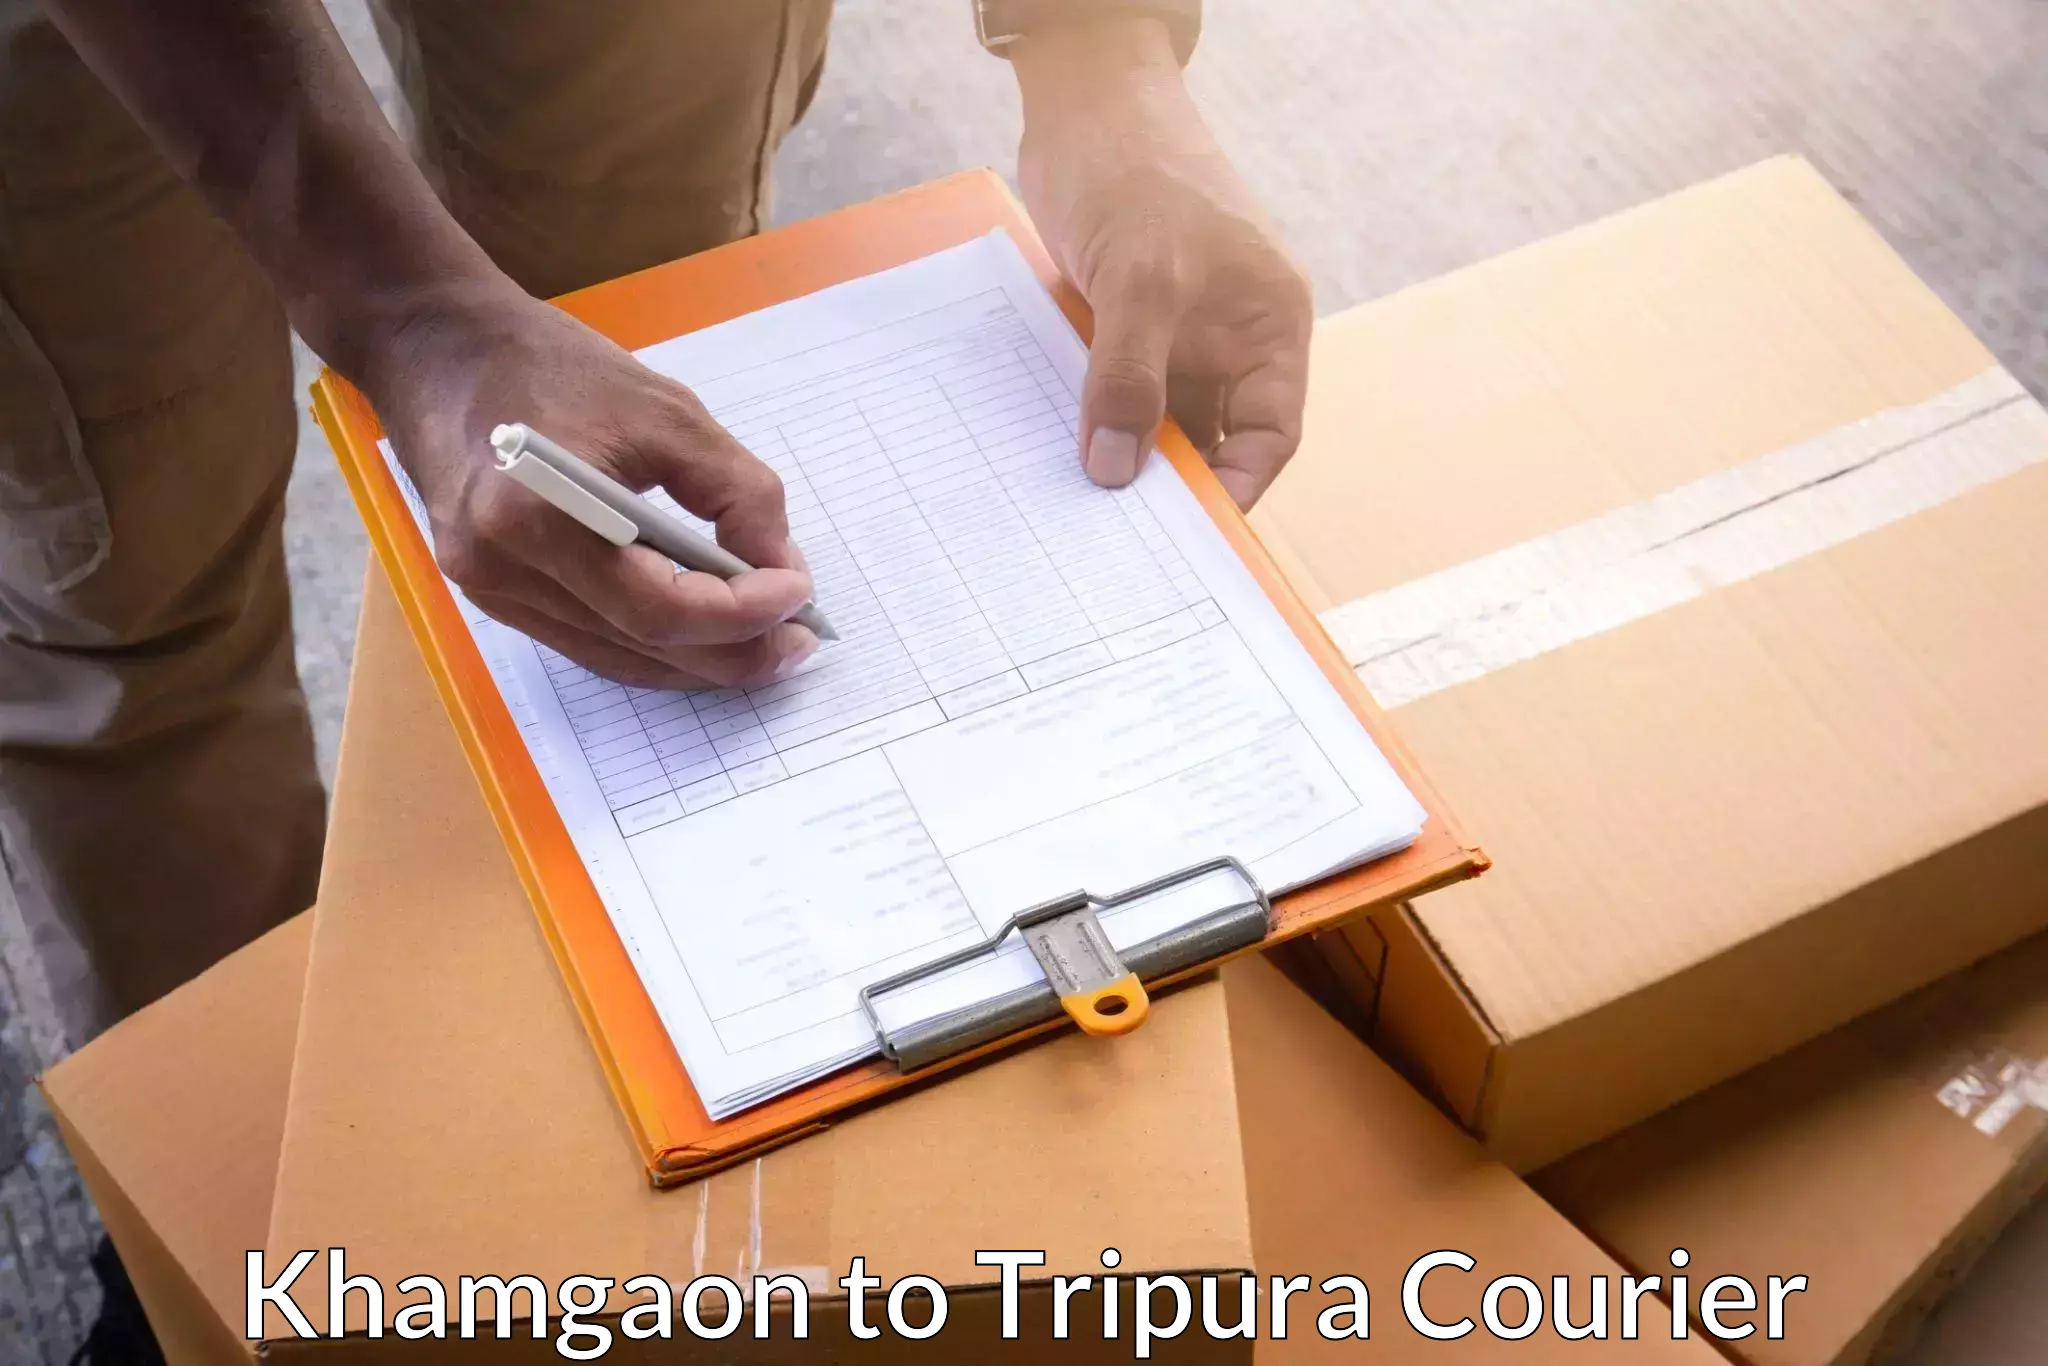 Express package delivery Khamgaon to Udaipur Tripura